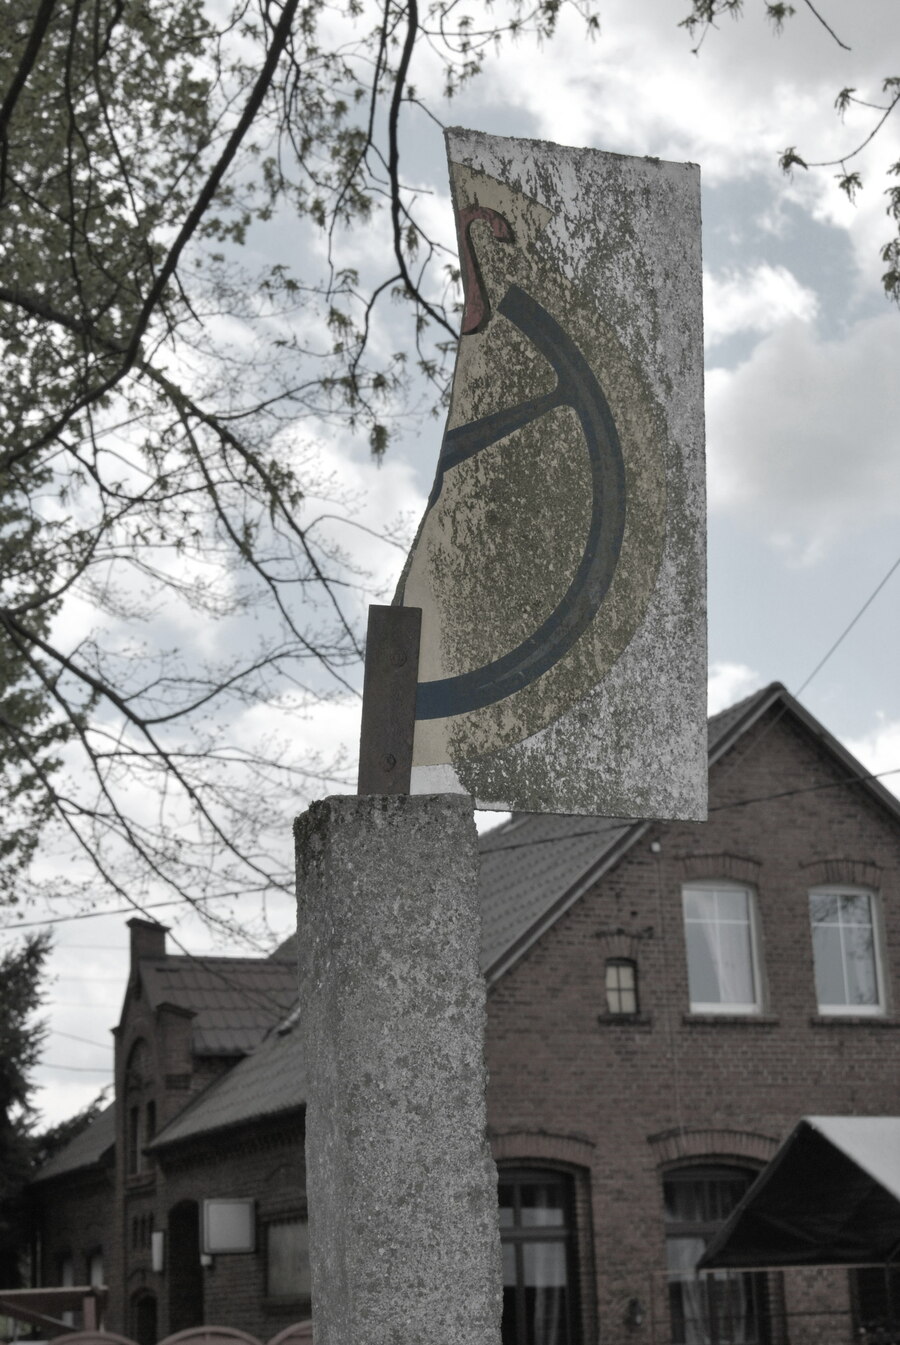 A picture of a broken bus stop sign